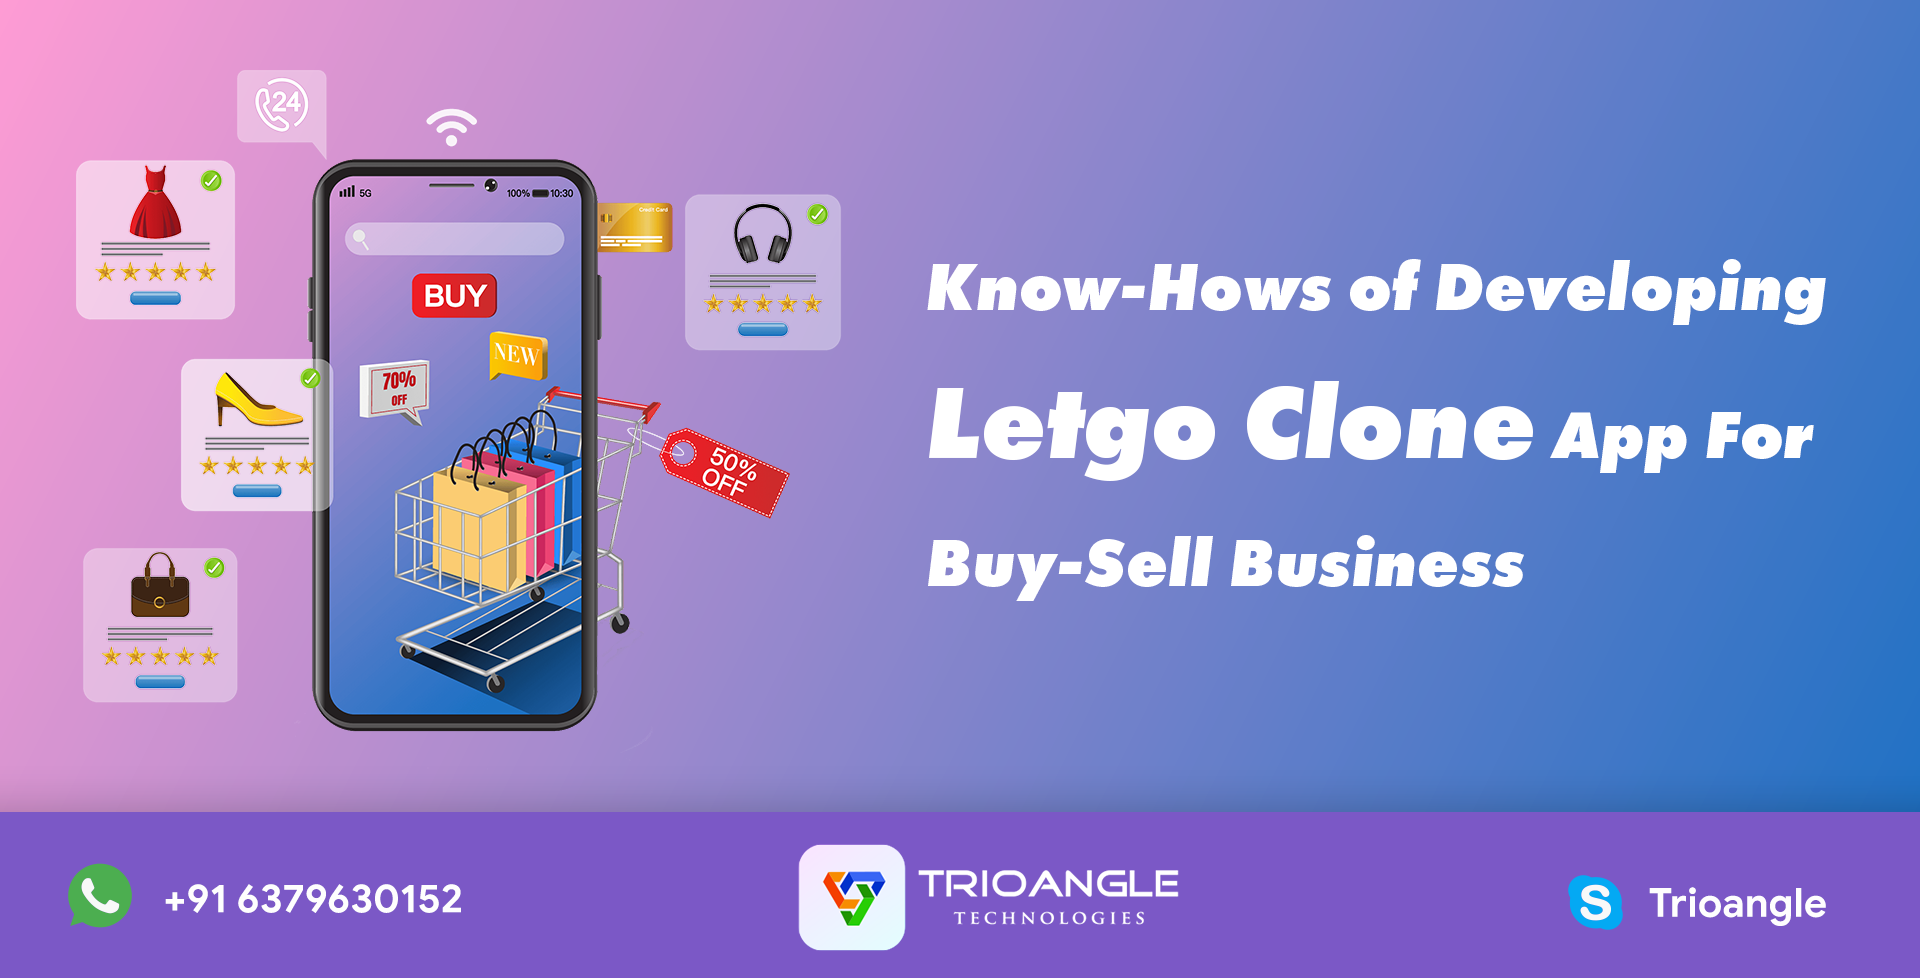 Know-Hows of Developing Letgo Clone App For Buy-Sell Business